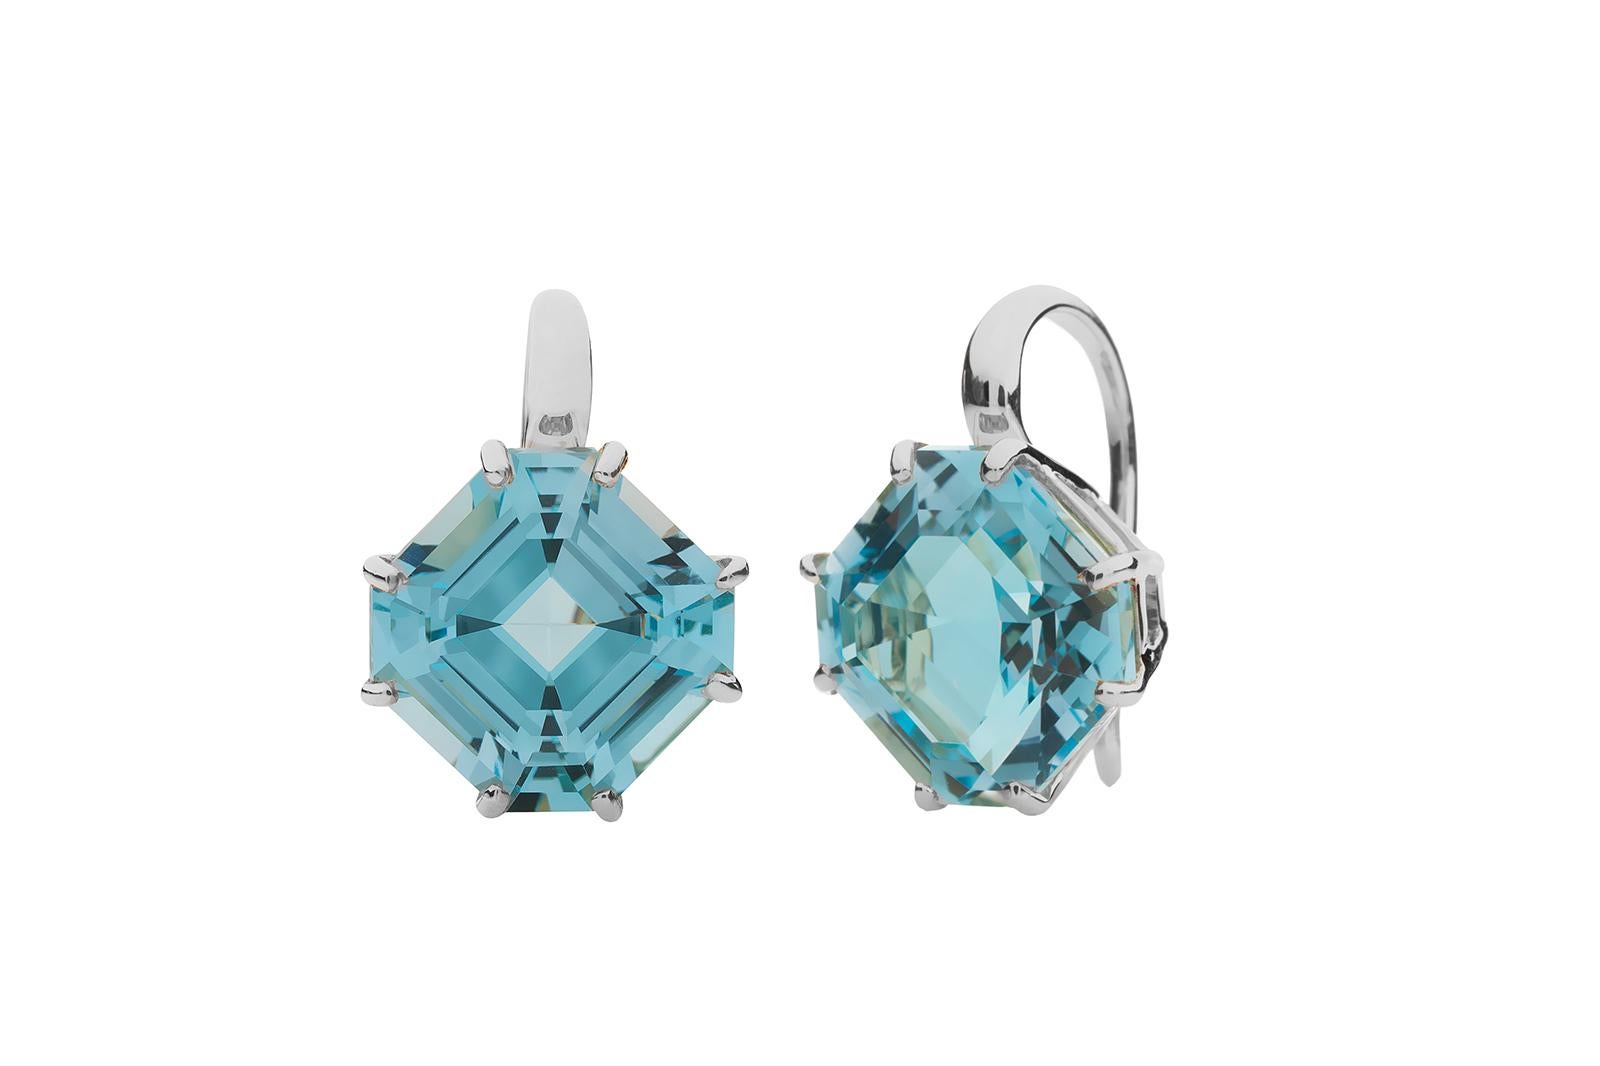 Blue Topaz Square Emerald Cut Earrings on French Wire in 18K White Gold from 'Gossip' Collection

Stone Size: 12 x 12 mm